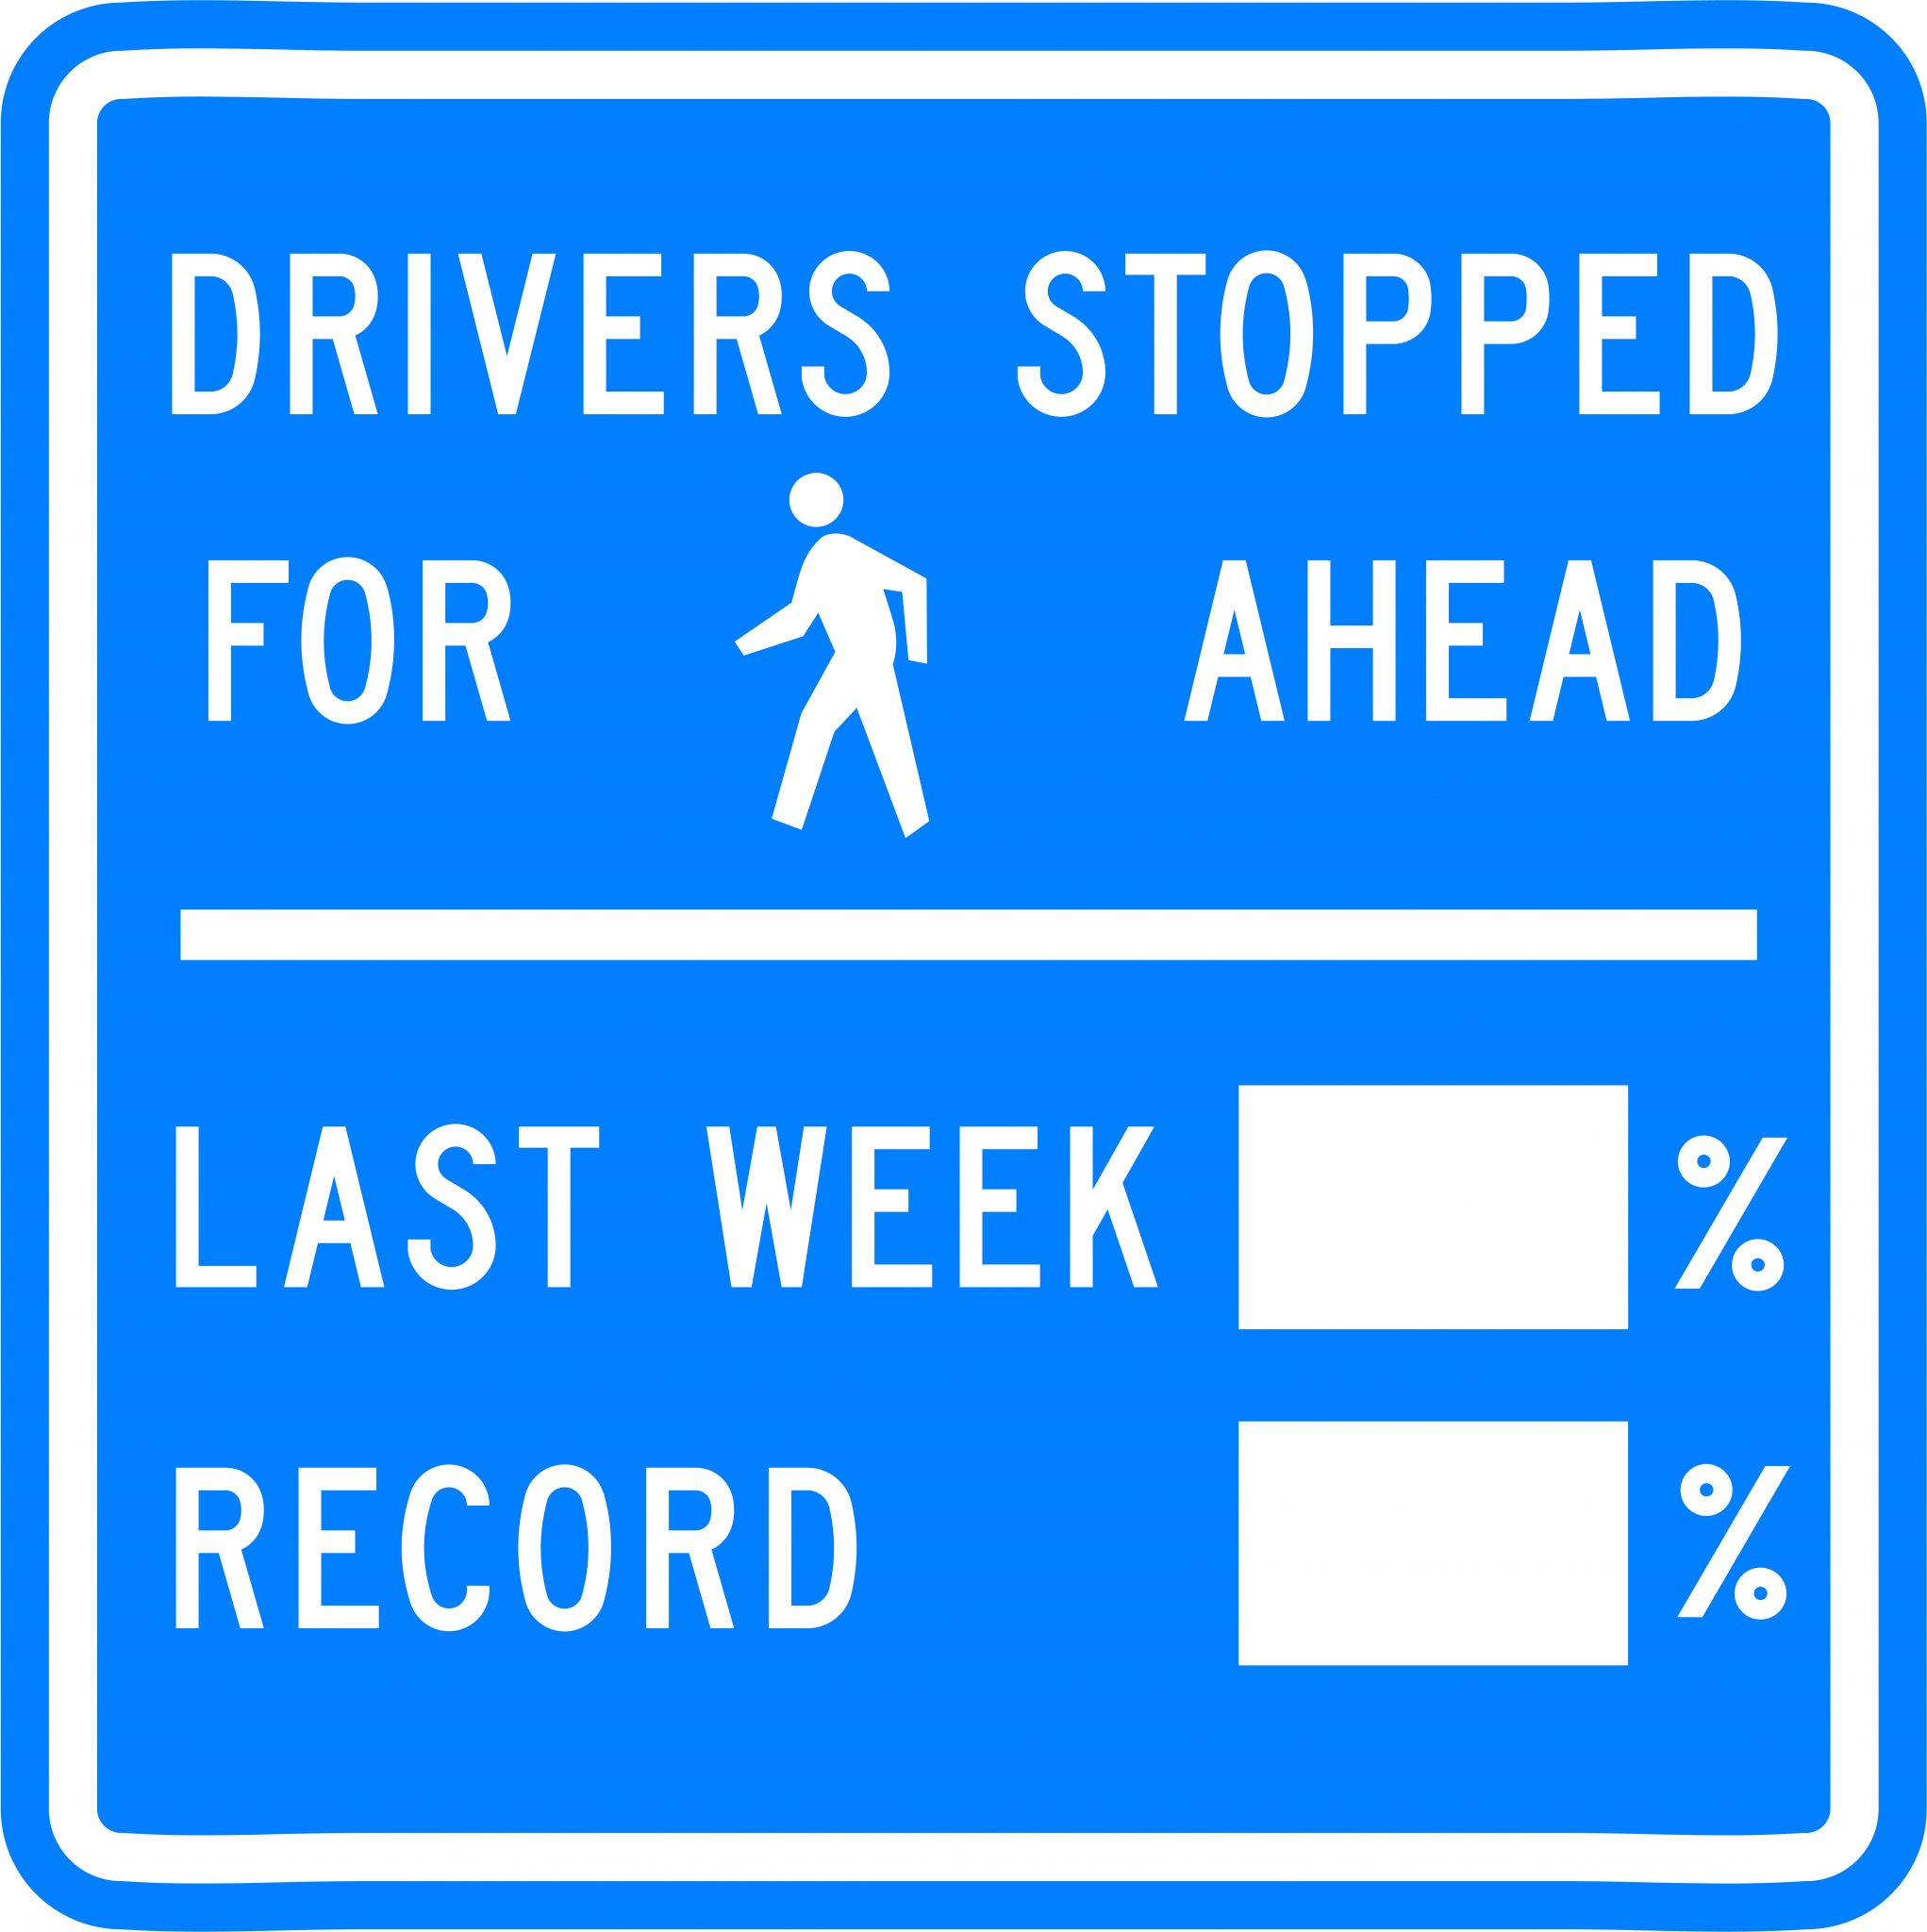 Graphic showing the “driver report card” signs being placed in Seattle. The background color is light blue, and the text a pedestrian walking icon is shown in white.